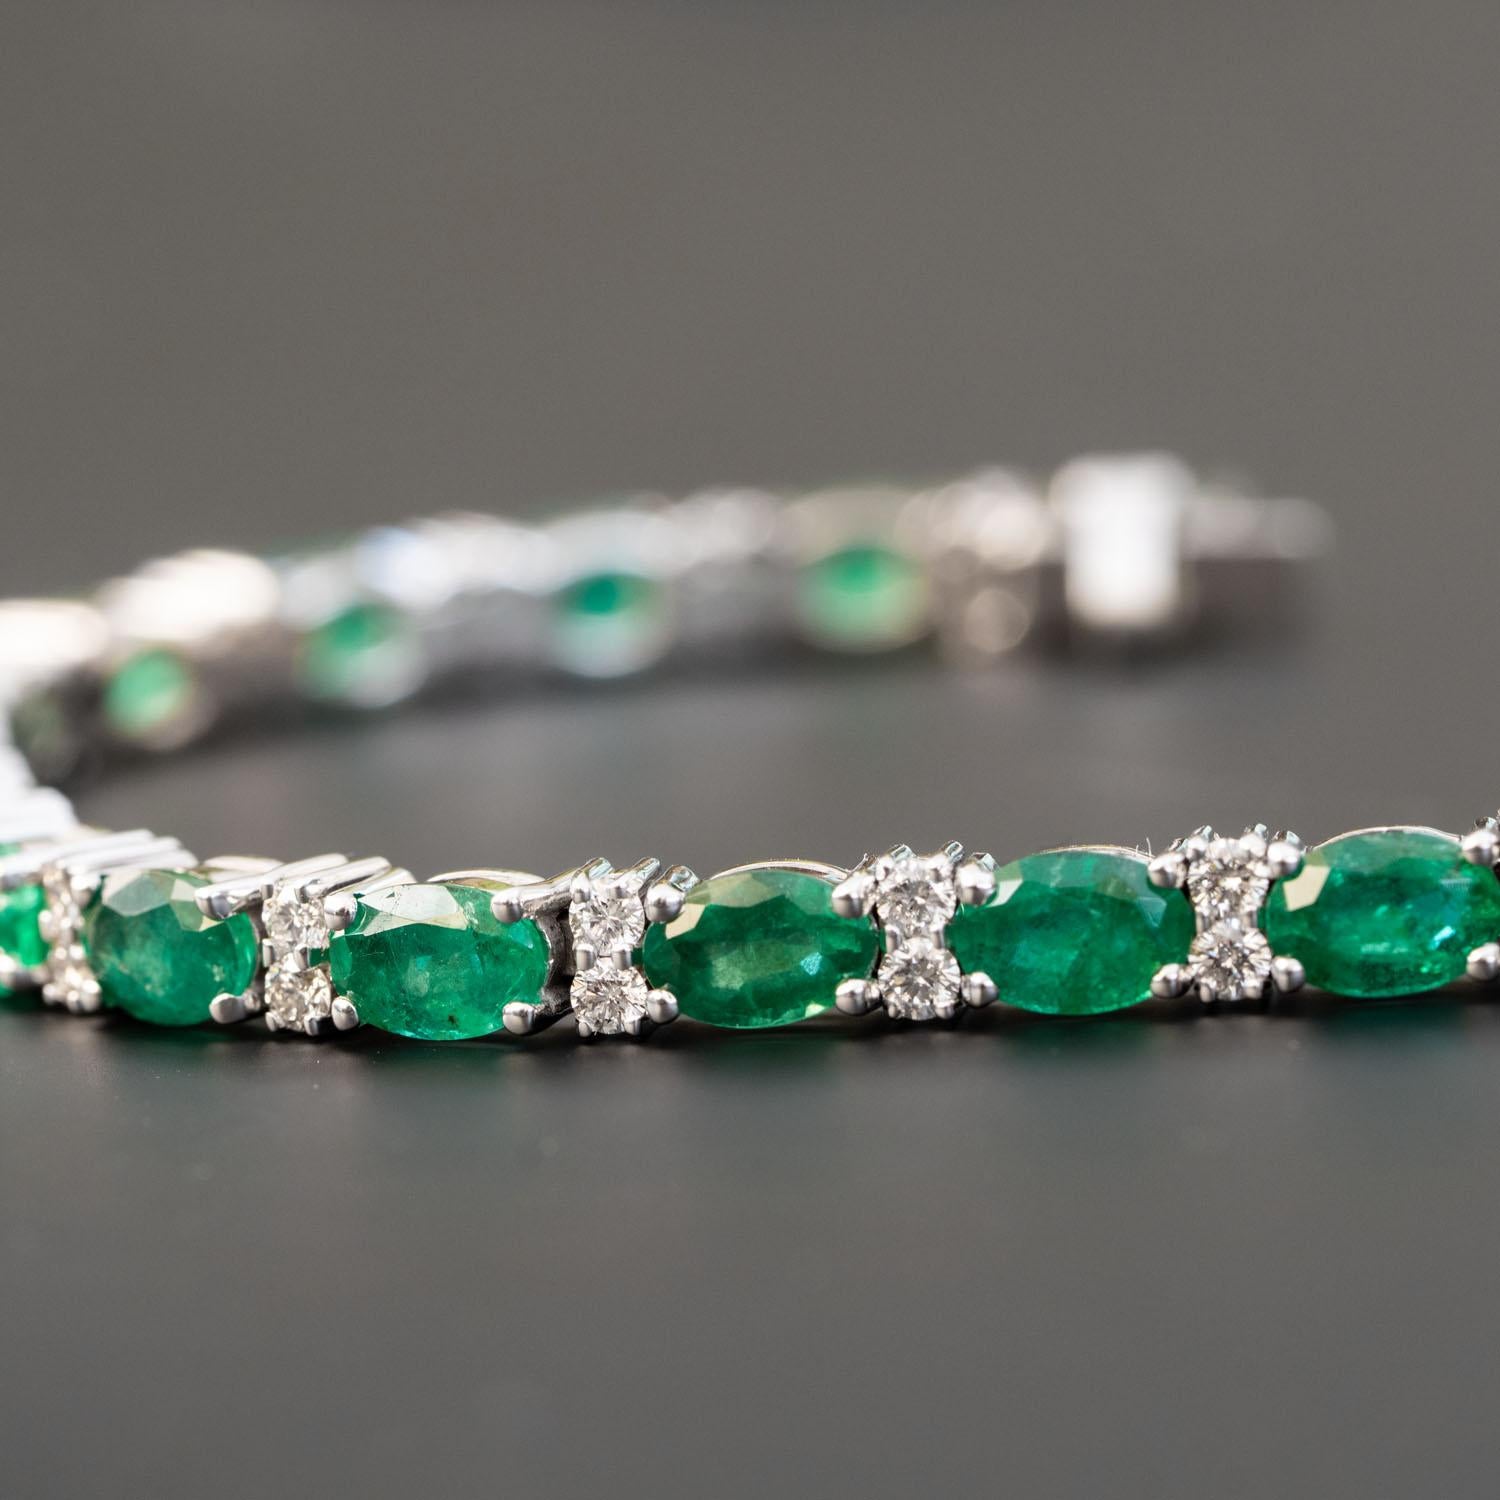 The timeless interspersed design wraps the wearer’s wrist in alternating oval faceted green natural emerald and sparkling white natural diamonds for a luxe look sure to earn appreciative glances. Each individually-set gemstone in the series lightly